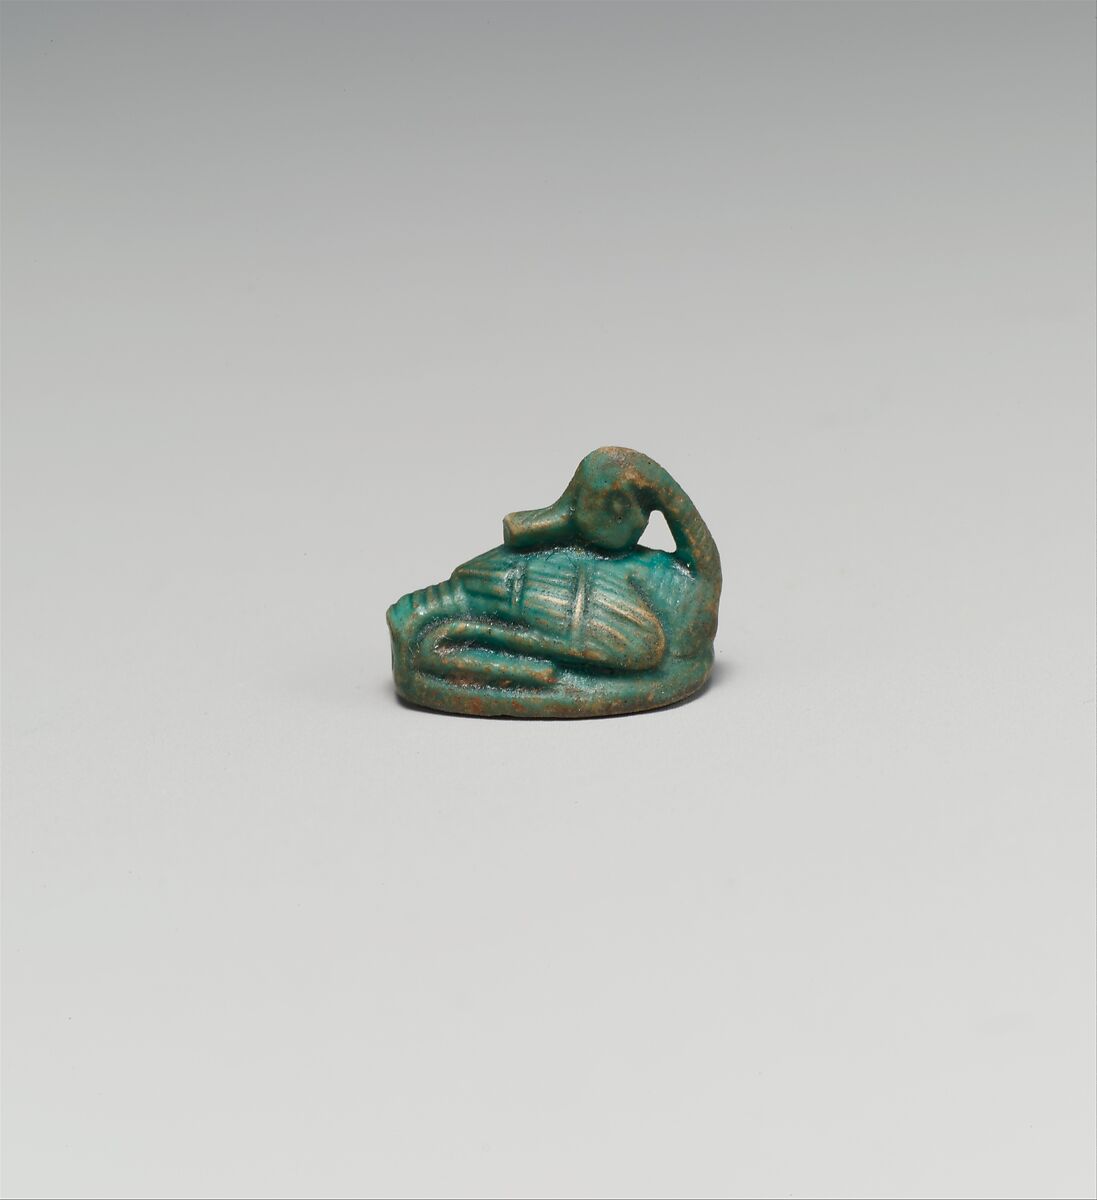 Design amulet in the form of a duck, Glazed steatite 